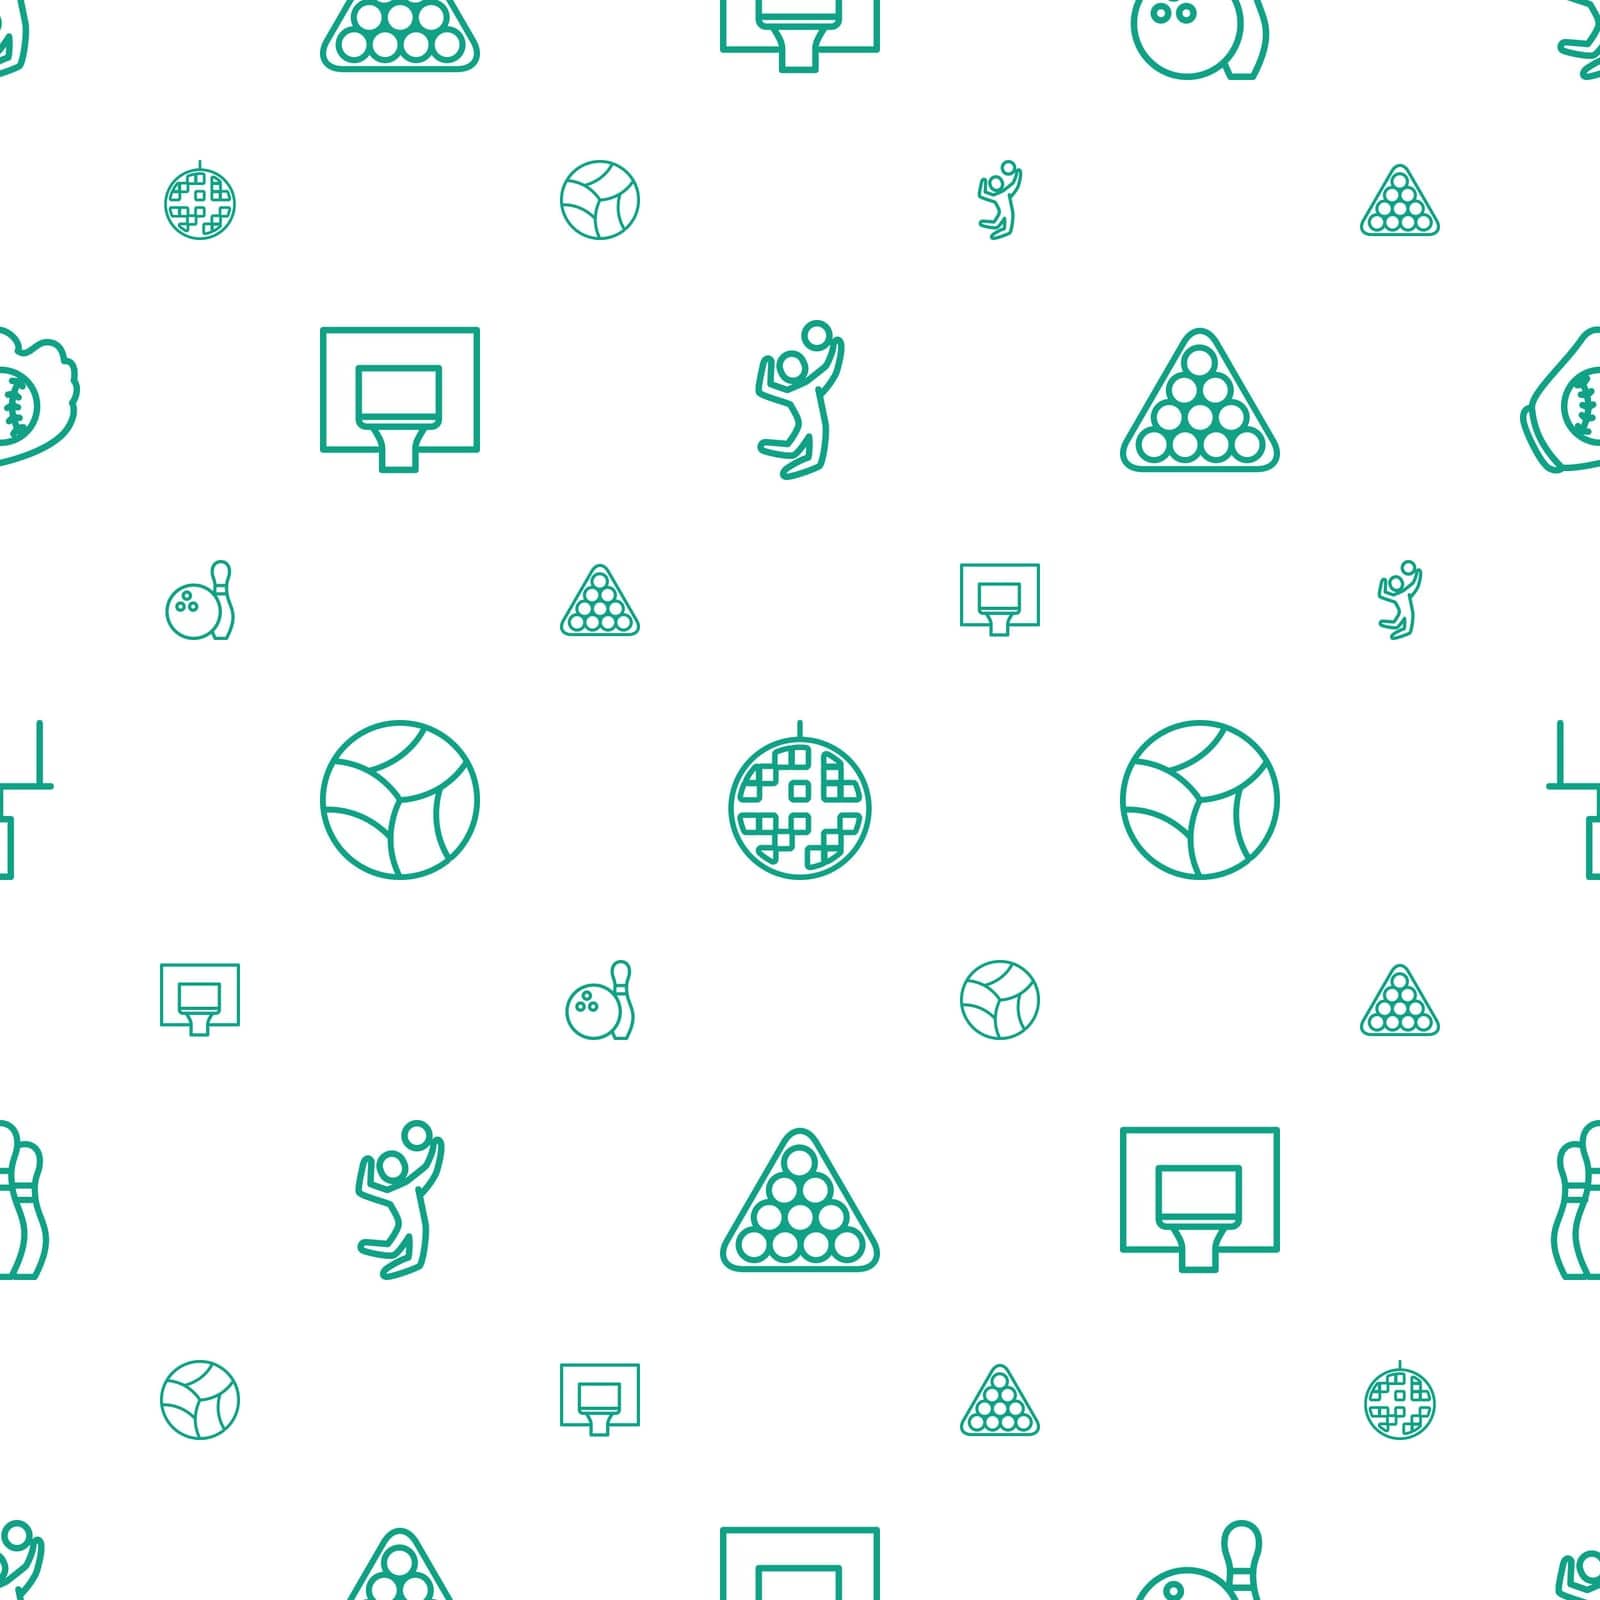 play,symbol,basket,game,line,glove,pattern,icon,sign,disco,isolated,competition,bowling,ball,basketball,white,post,design,vector,decoration,leisure,graphic,player,element,goal,recreation,league,equipment,team,billiards,round,background,beach,silhouette,baseball,volleyball,illustration,sport,fun,object,hobby by ogqcorp